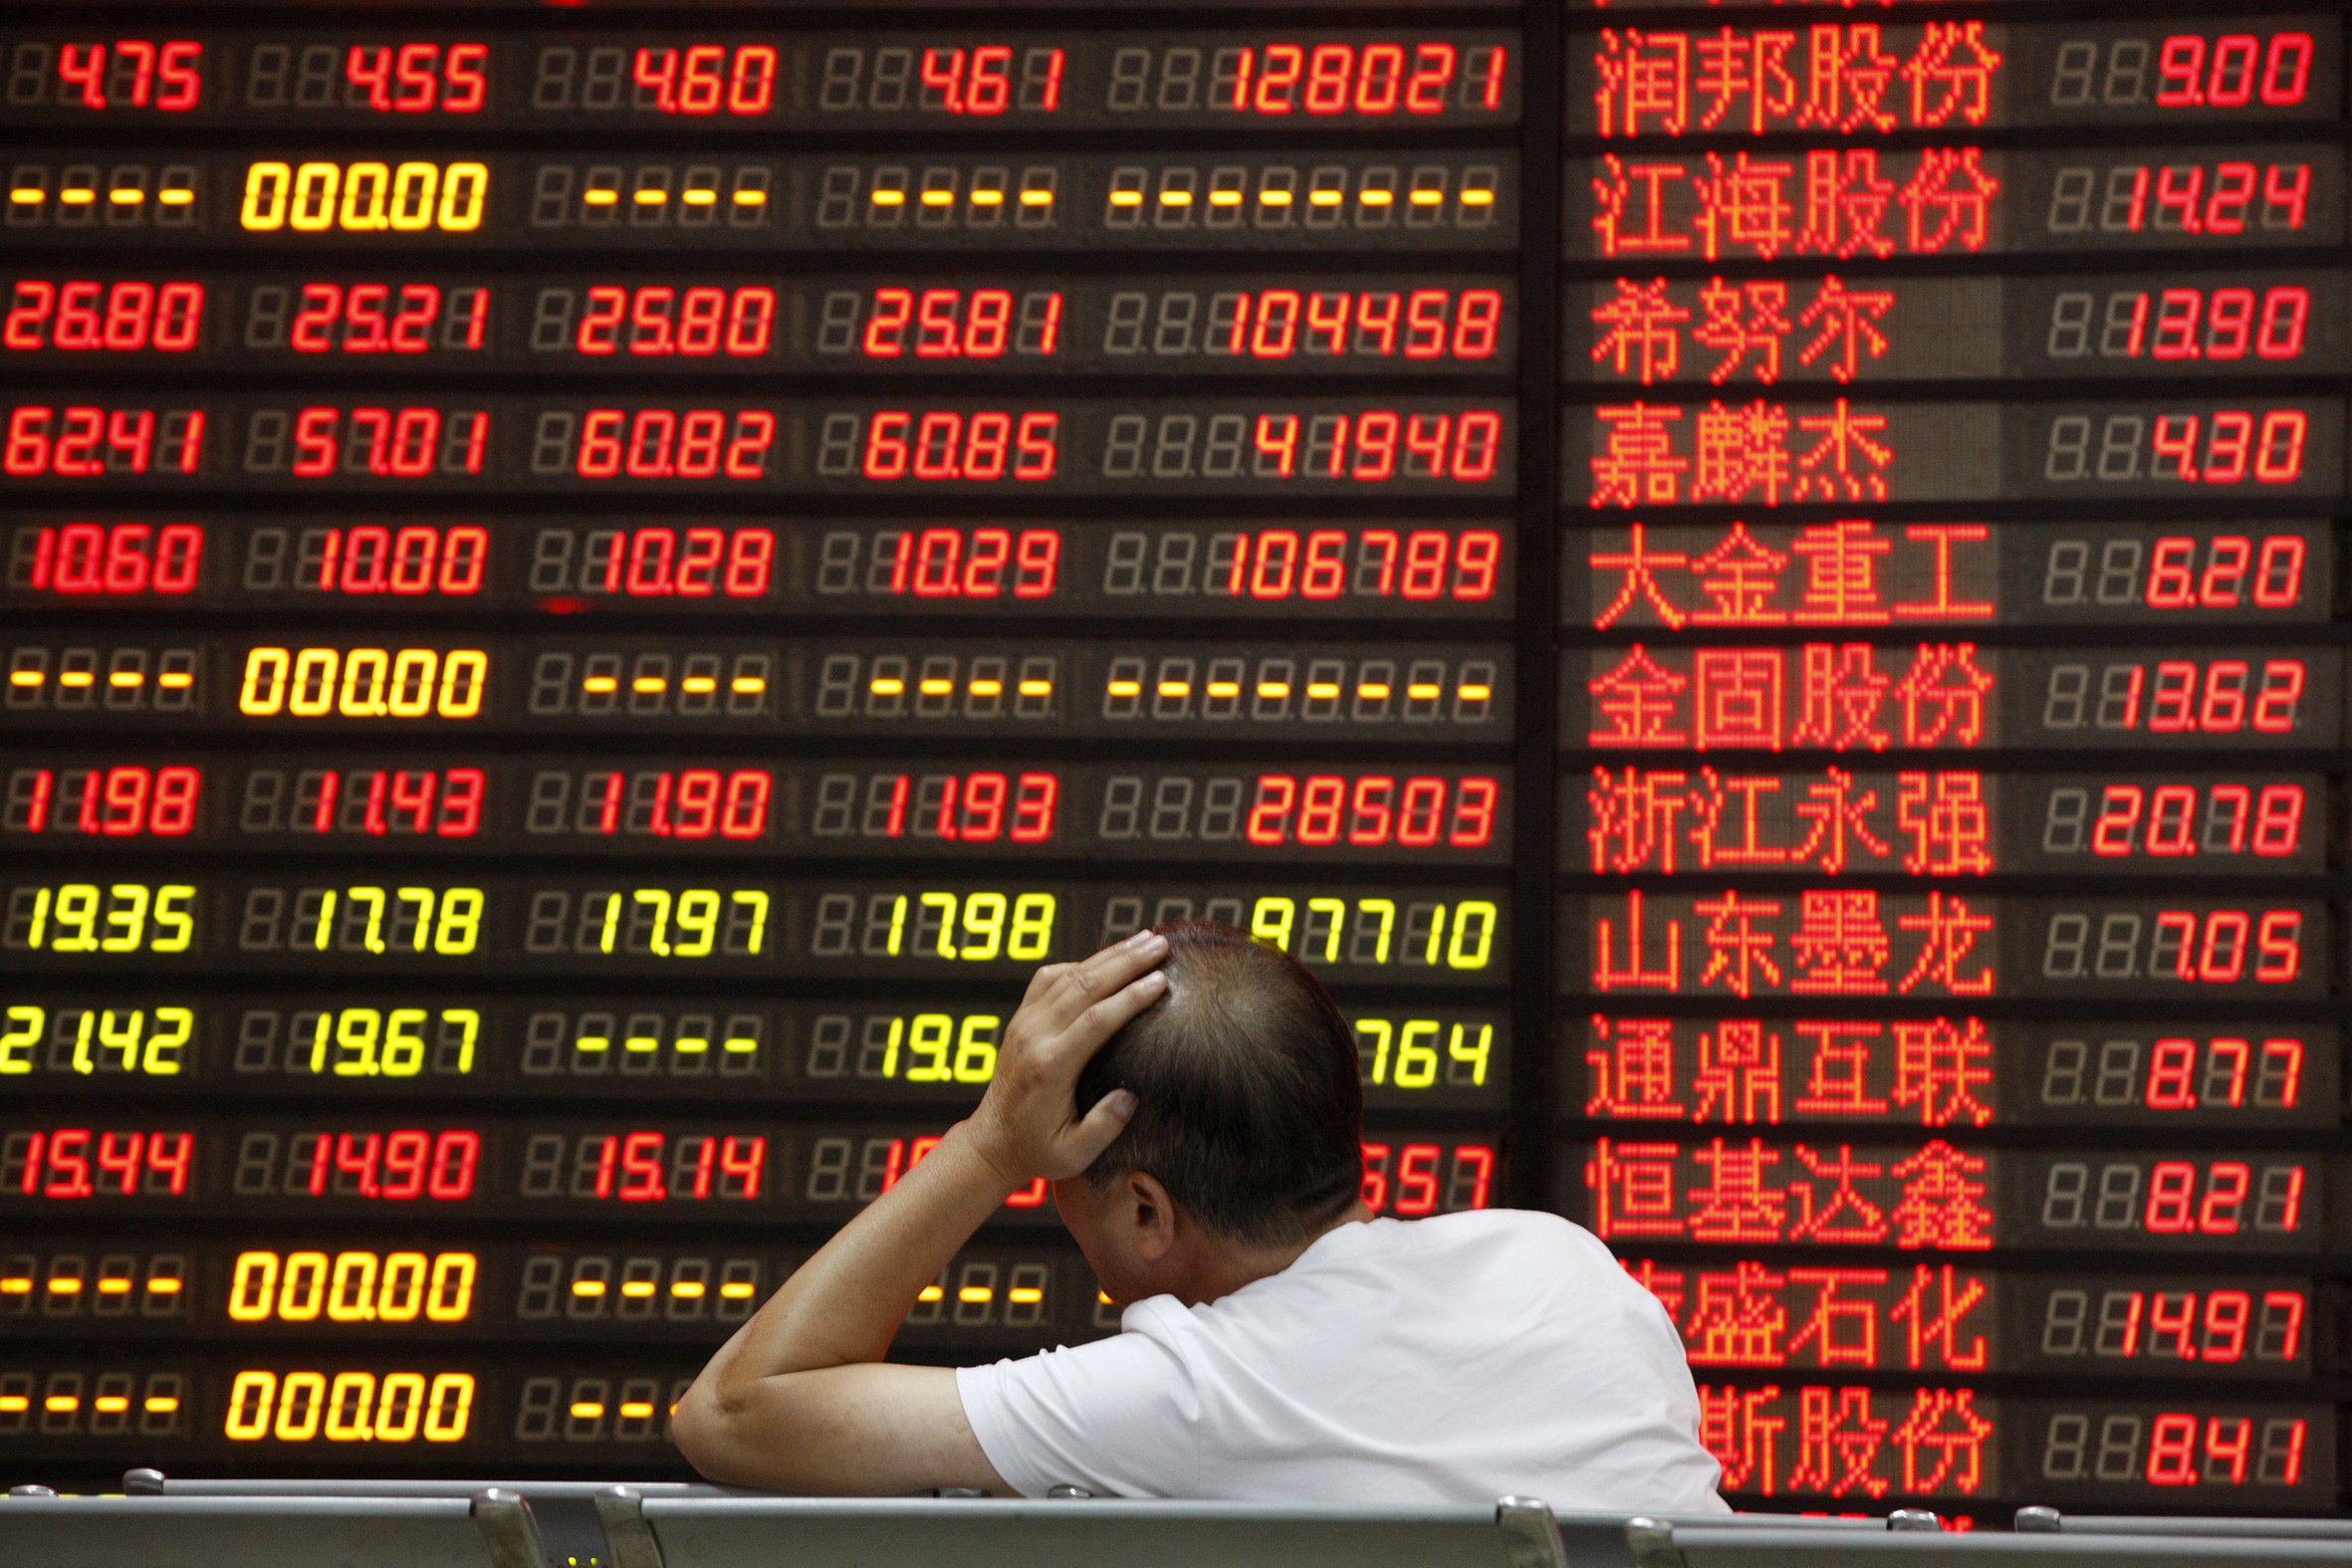 An investor watchs an electronic board showing stock prices in Huaibei, in eastern Chinese province of Anhui. Photo: Shutterstock